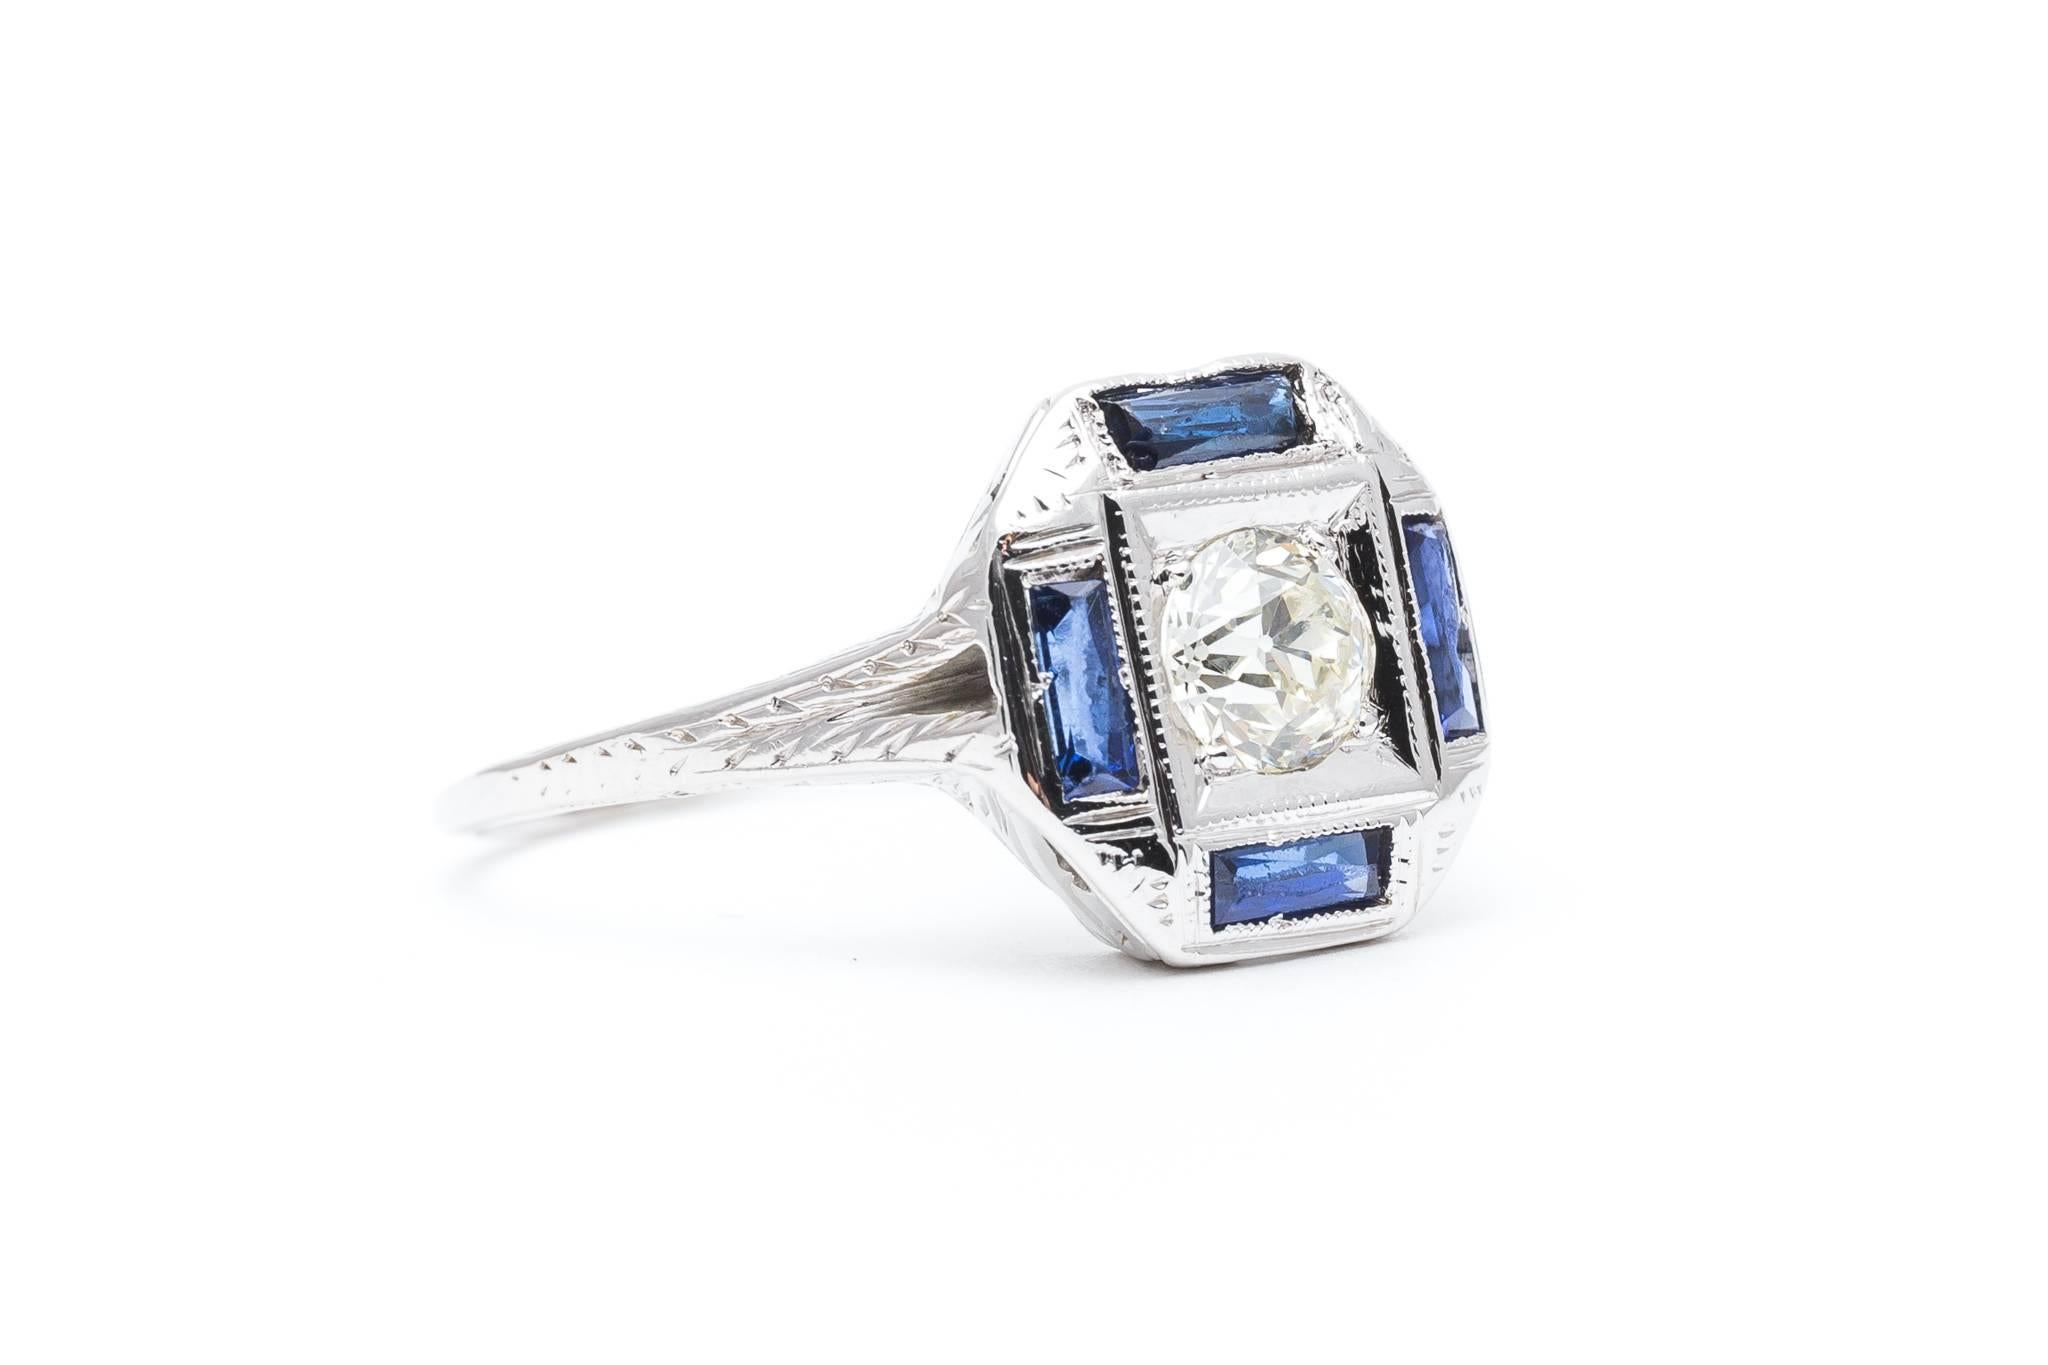 A beautiful original early art deco period diamond and sapphire engagement ring in 18 karat white gold. Made by the original inventors of the white gold alloy, this original Belais signed ring is a scarce example of an original Belais Brothers